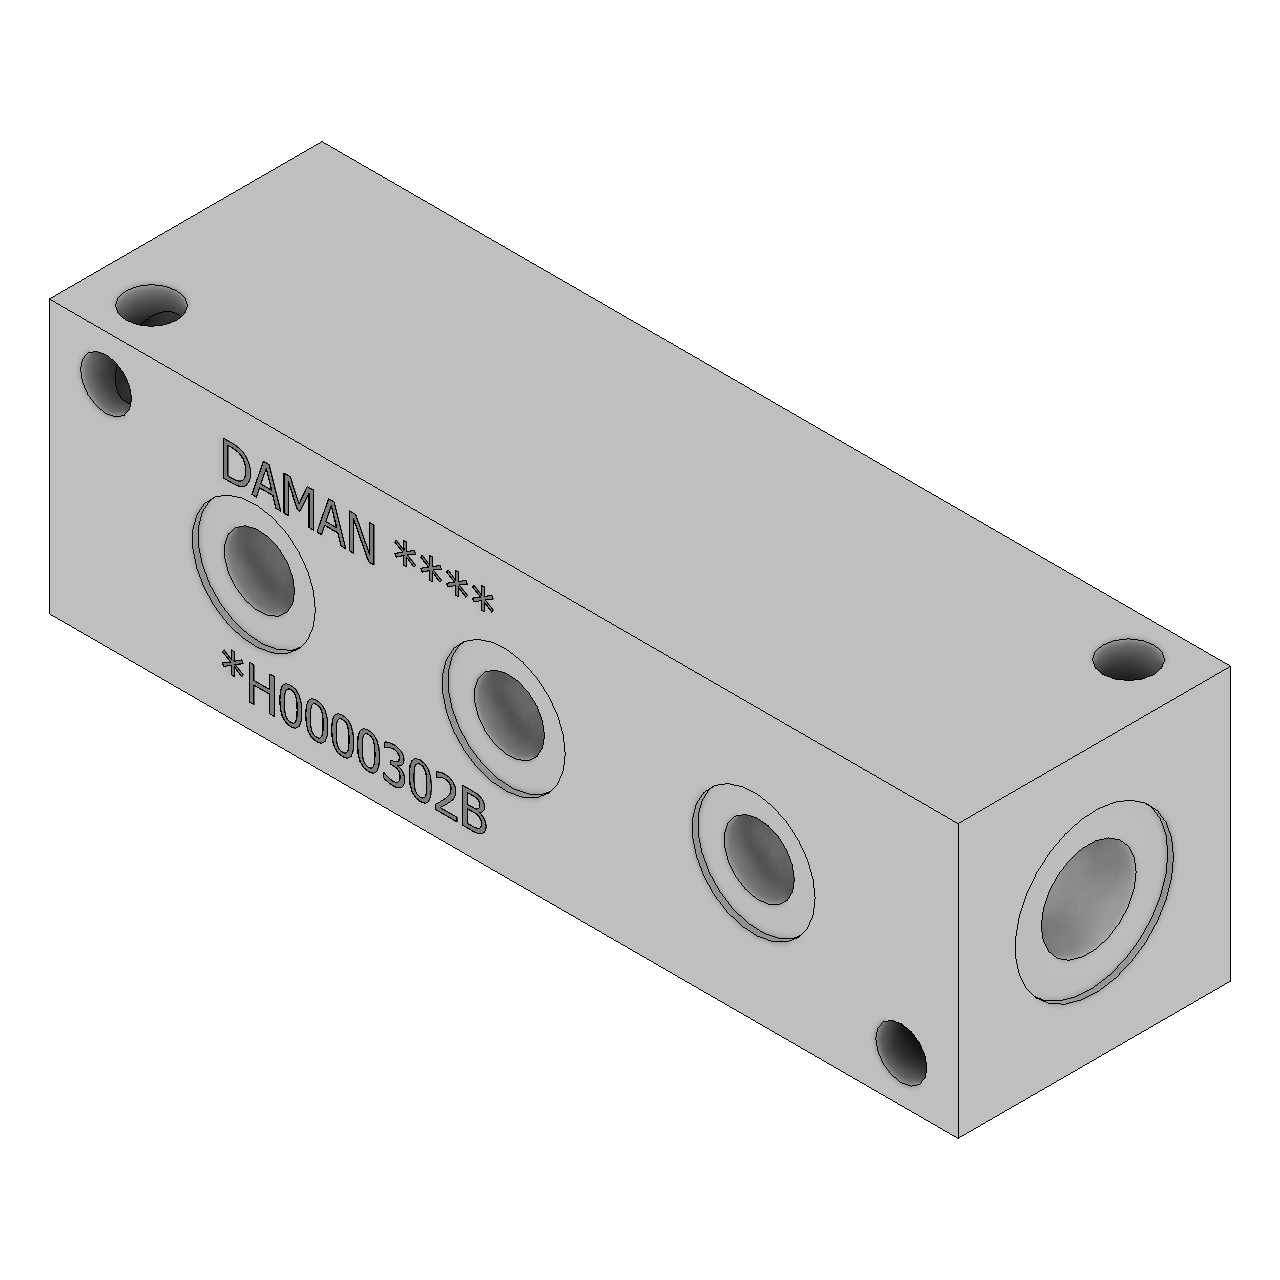 DH0000302B - Header and Junction Blocks